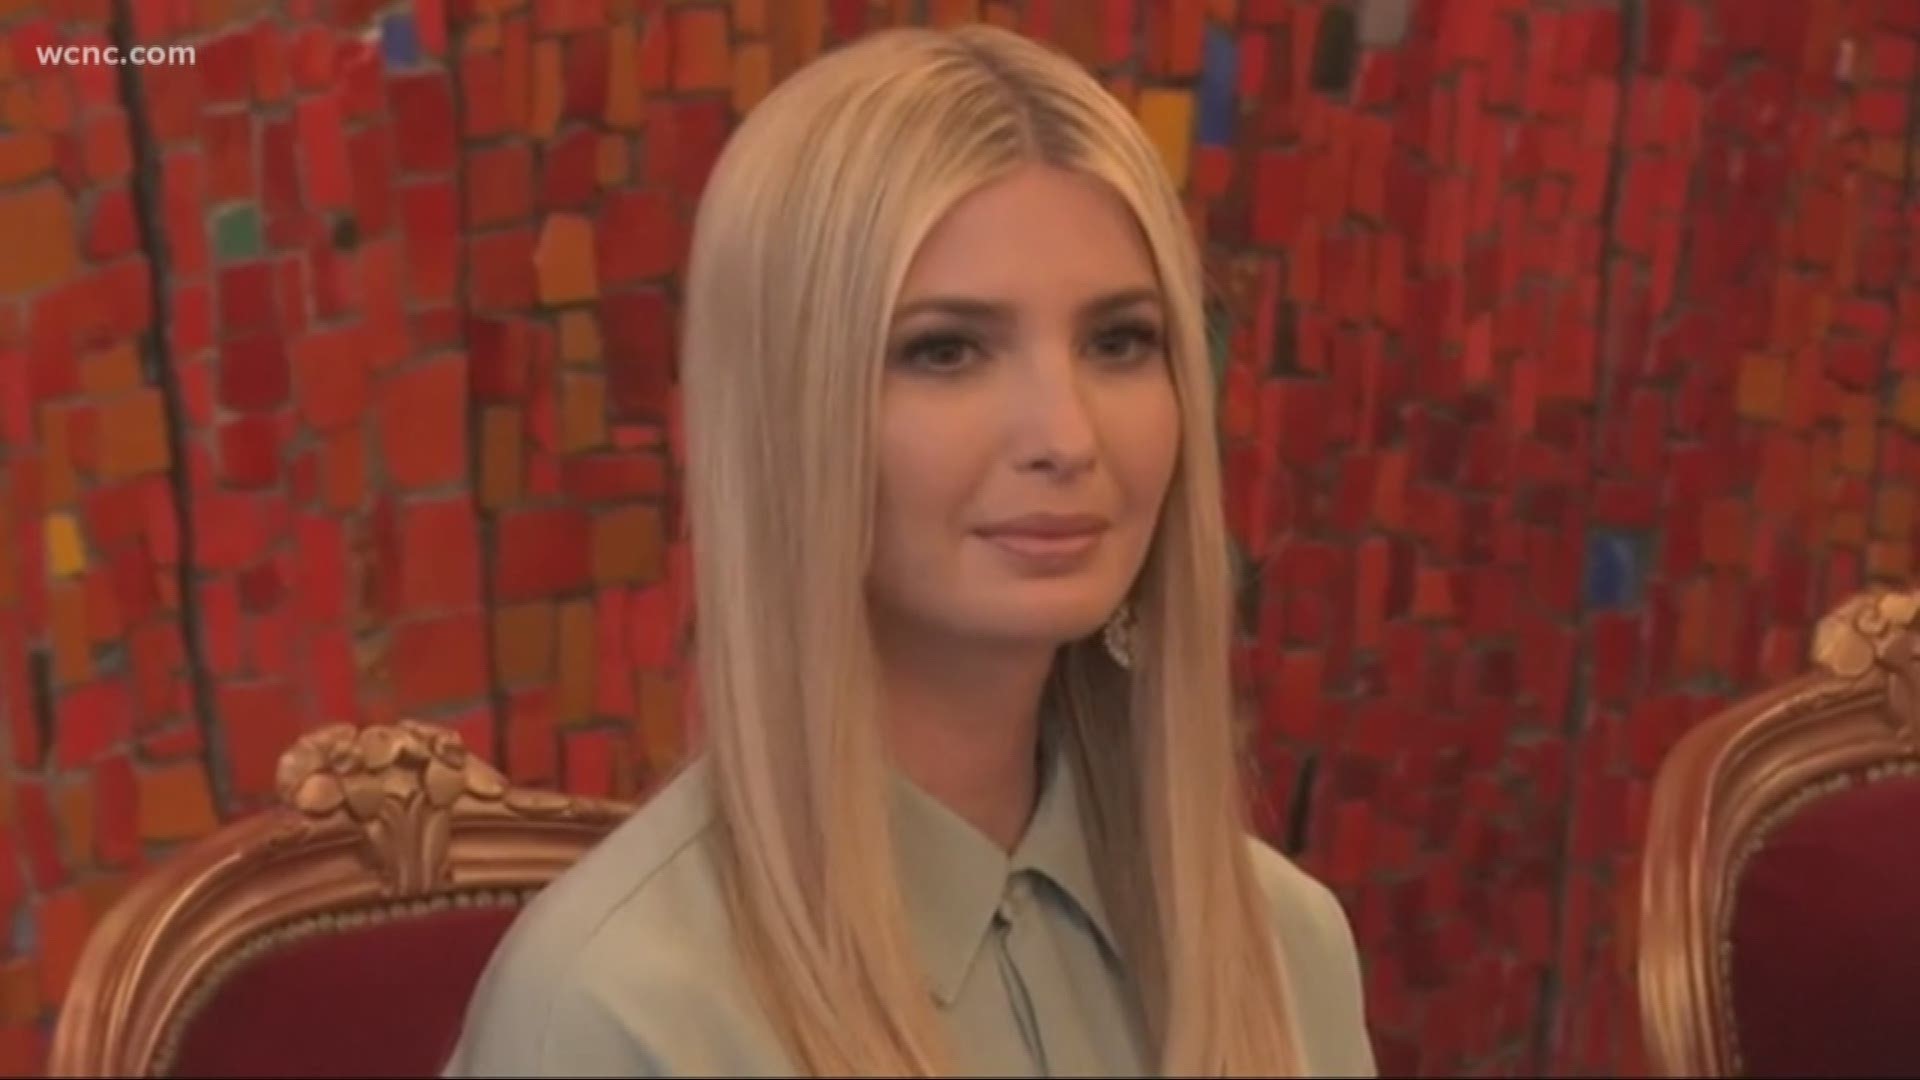 First daughter Ivanka Trump will be in Charlotte Tuesday. She is scheduled to appear at the American Workforce Policy Advisory board meeting. Mayor Vi Lyles will also be there.